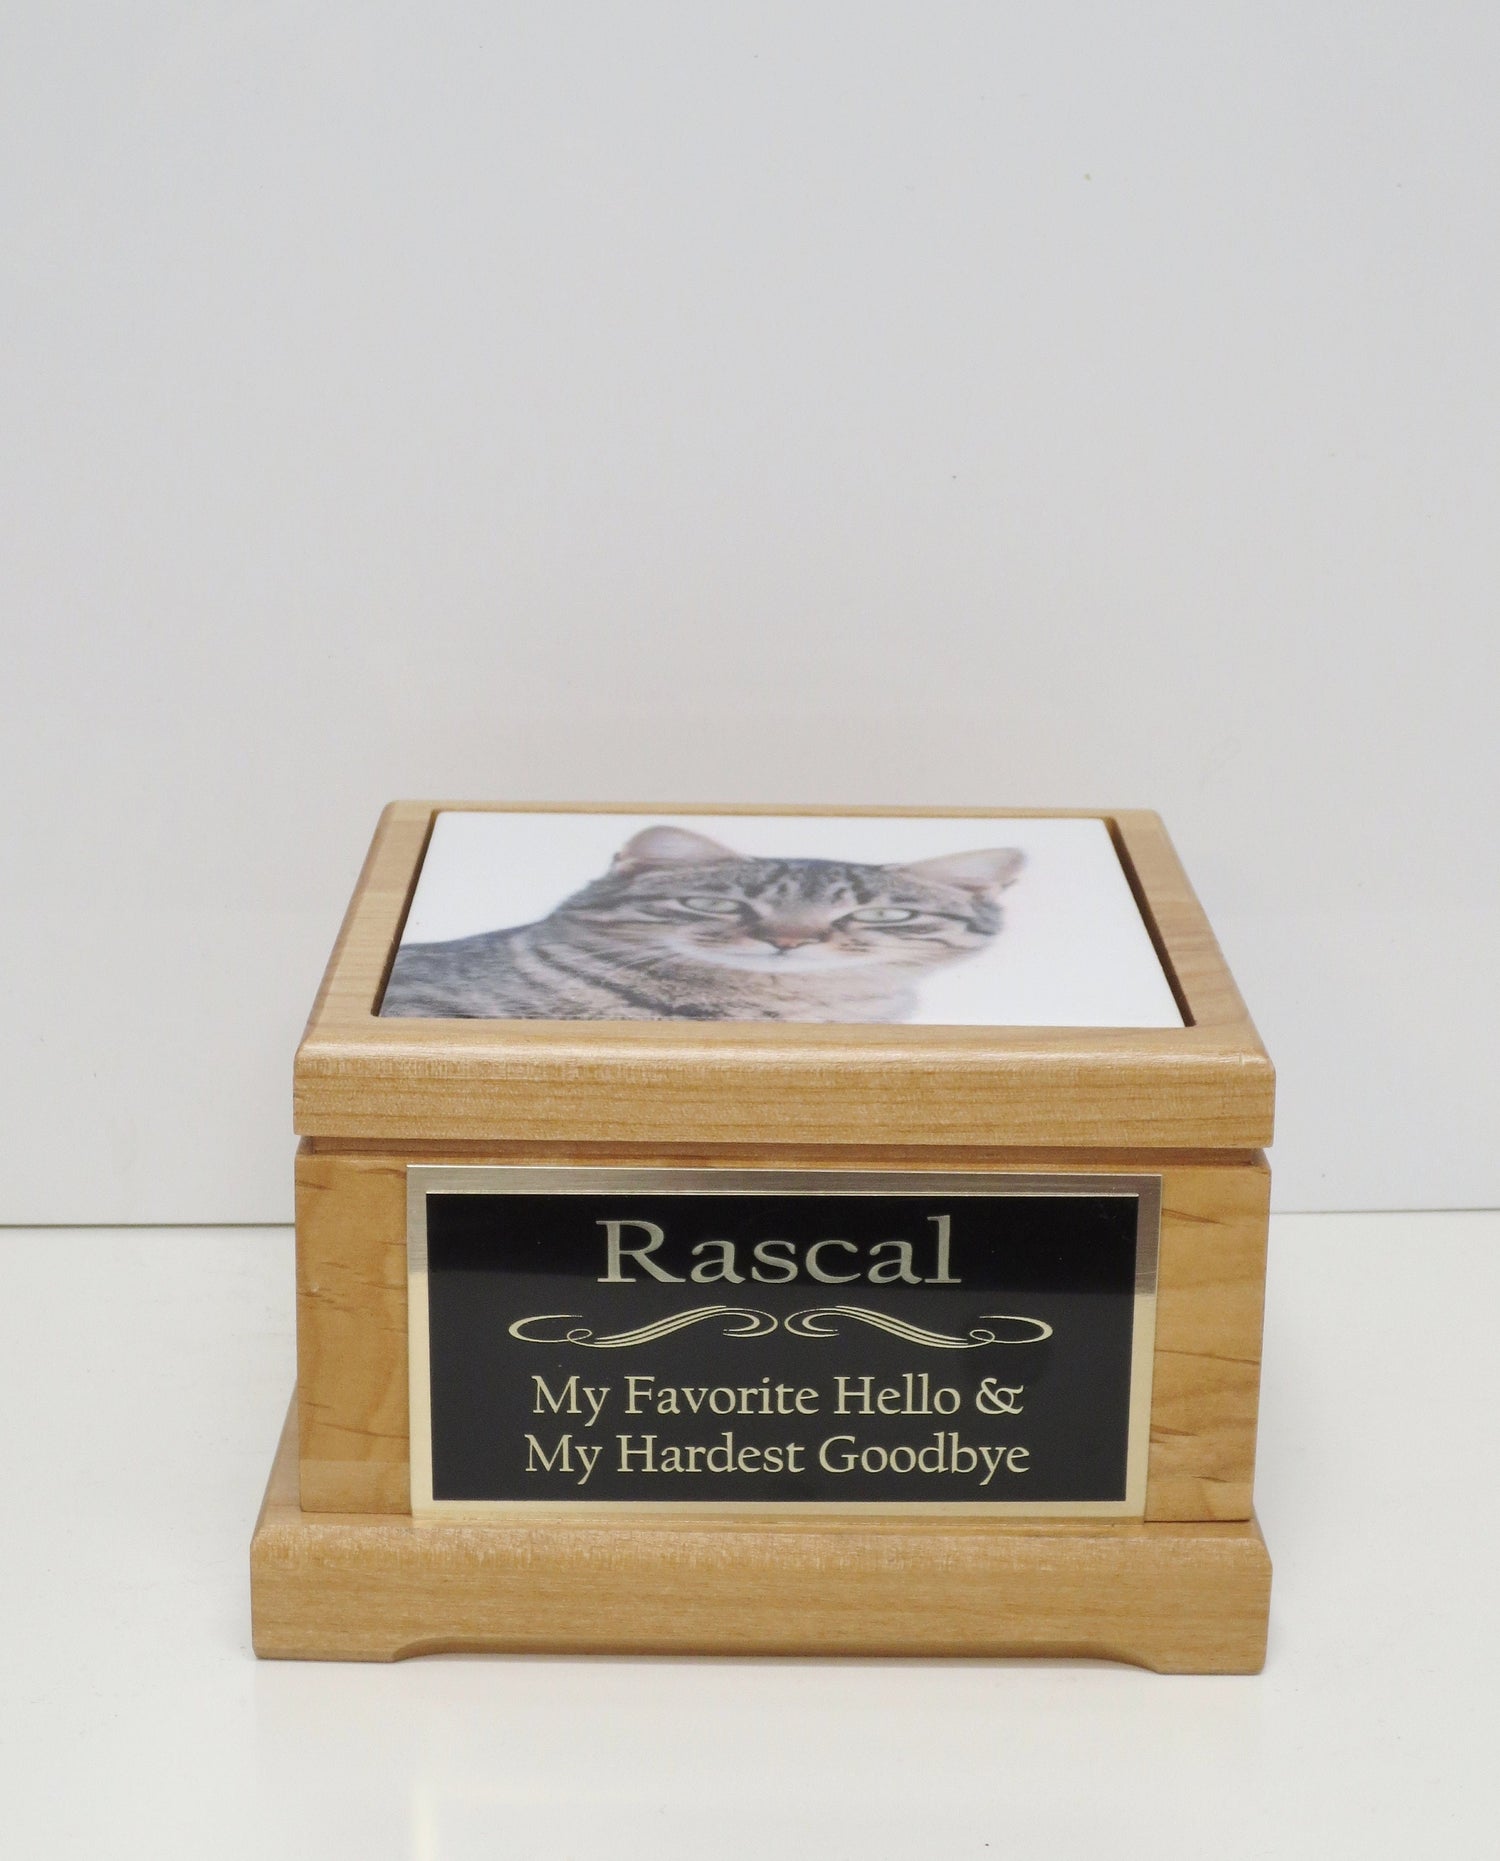 Memorial Pet Urn Cat Cremation Urn with Custom Photo & Engraving Pet Memorial Keepsake Cremation Urn Kitty or Small Animal Personalized